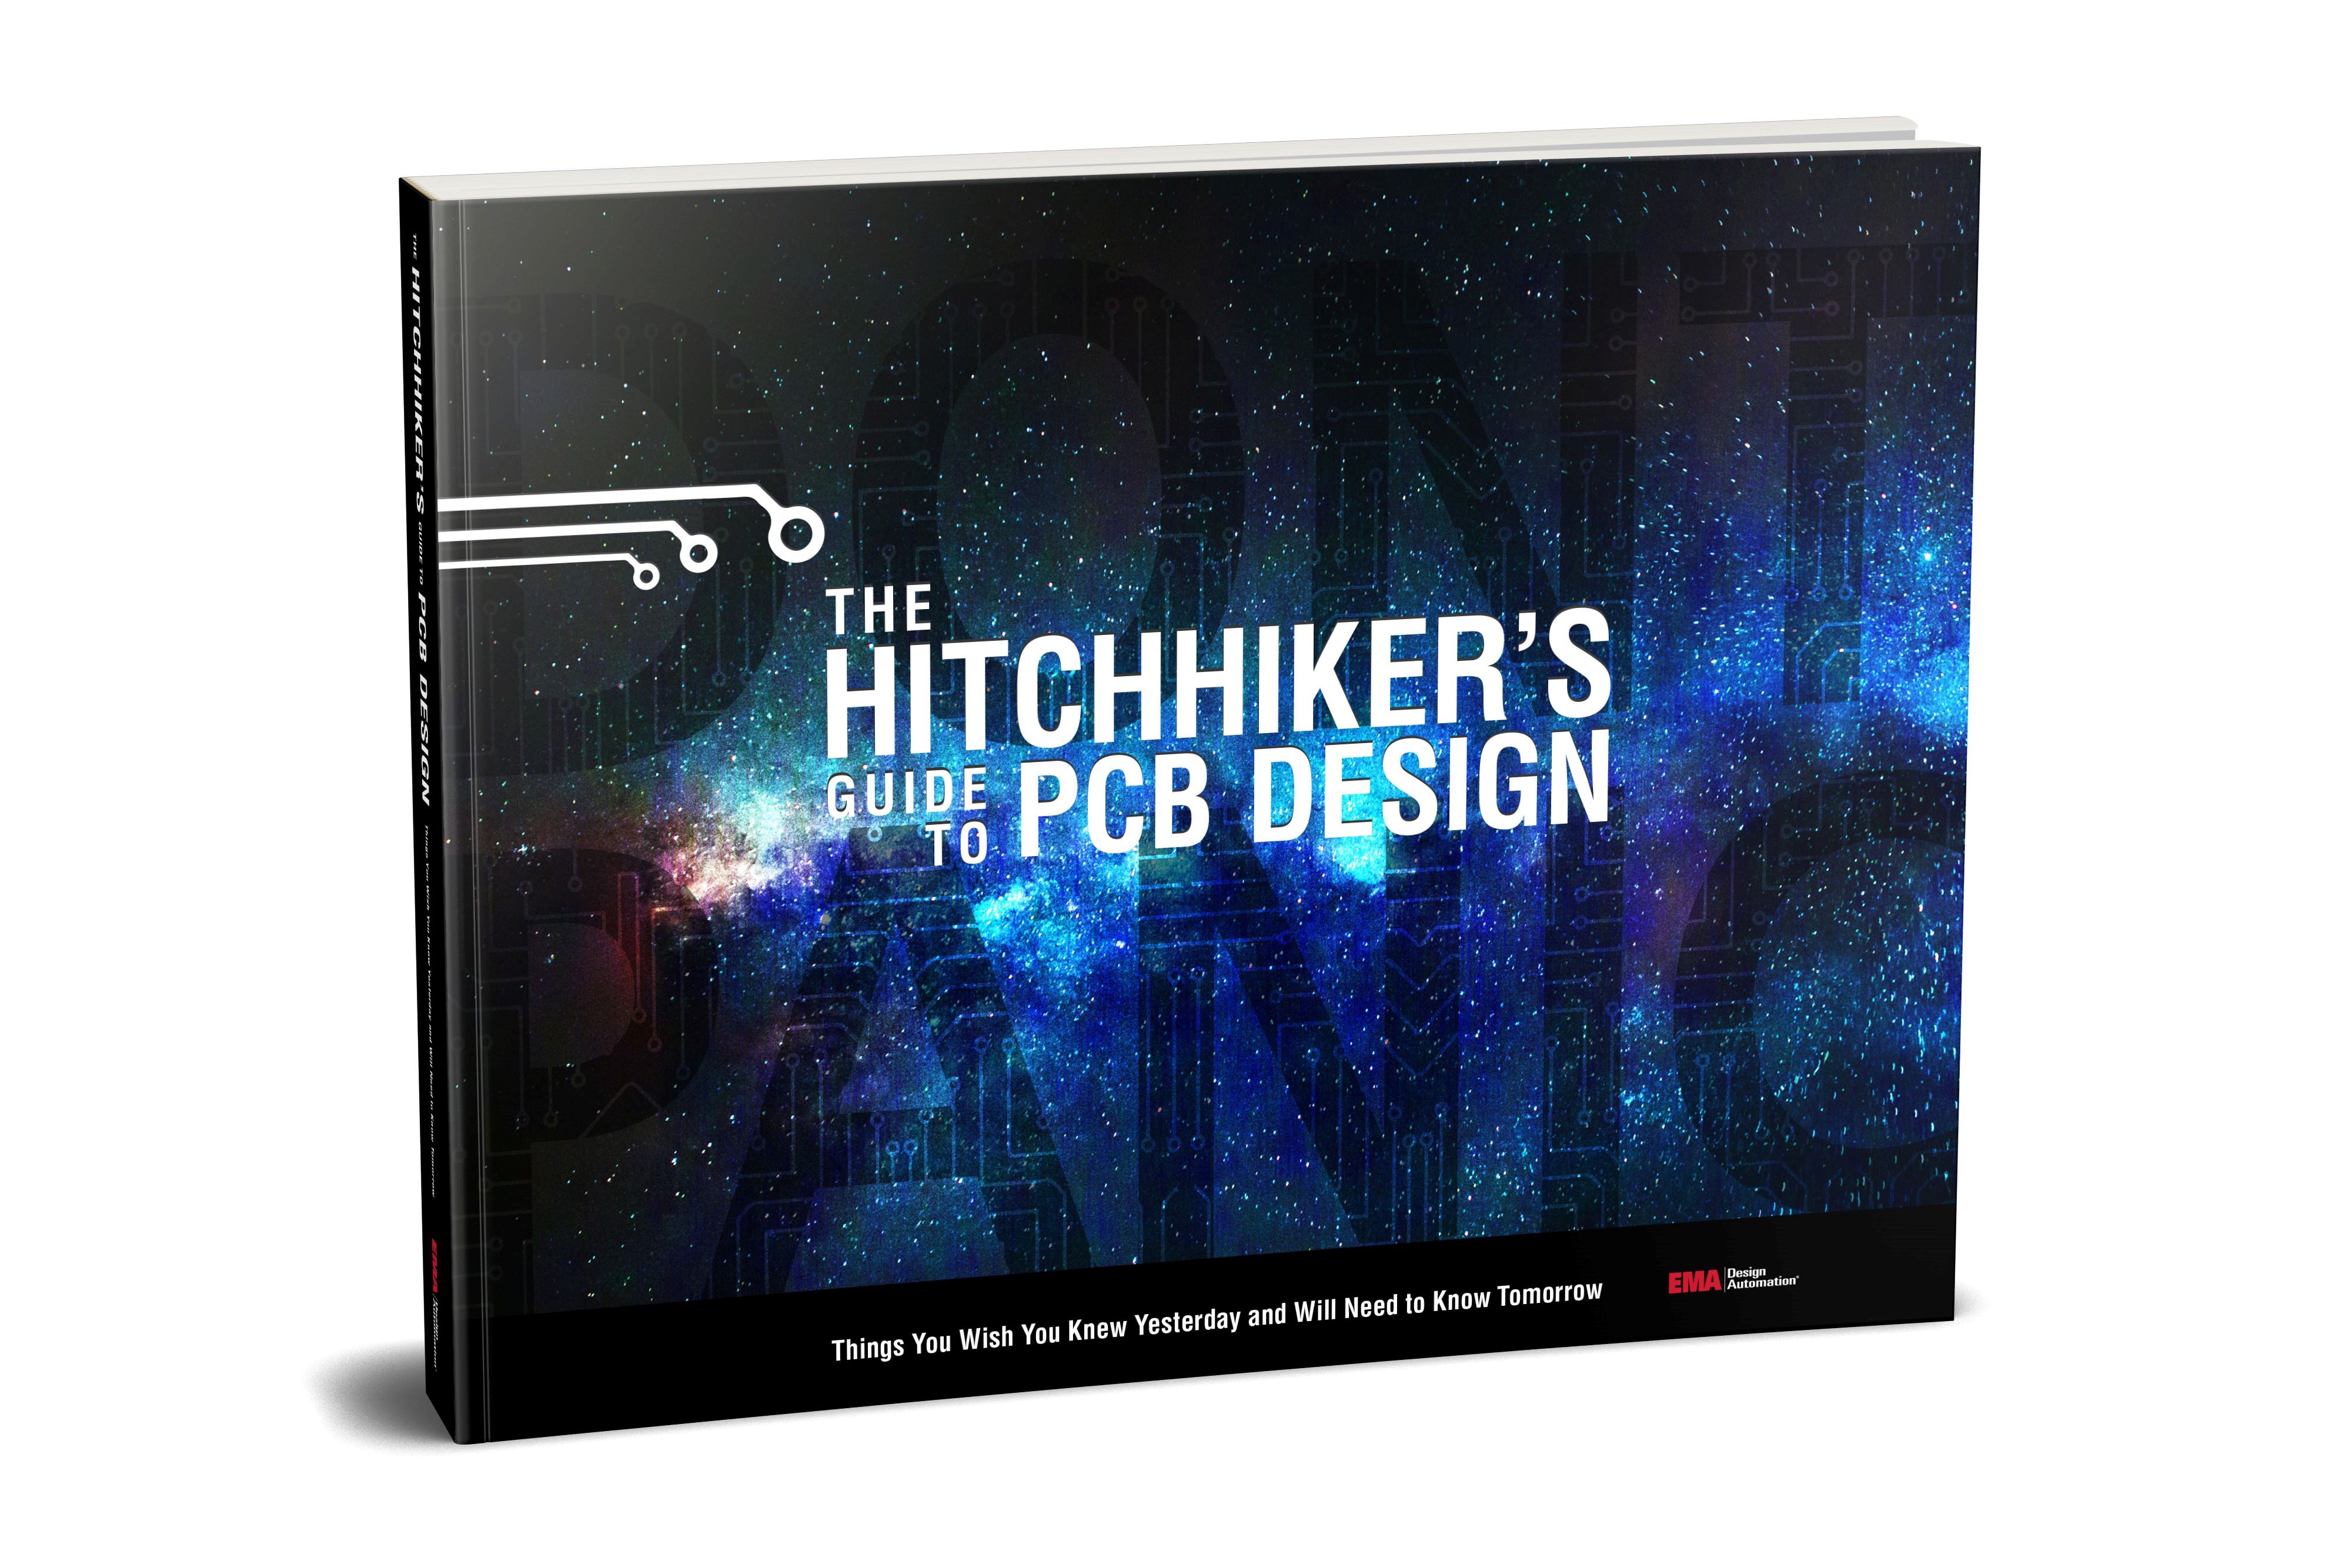 EMA Design Automation is offering a free eBook titled The Hitchhikers Guide to PCB Design